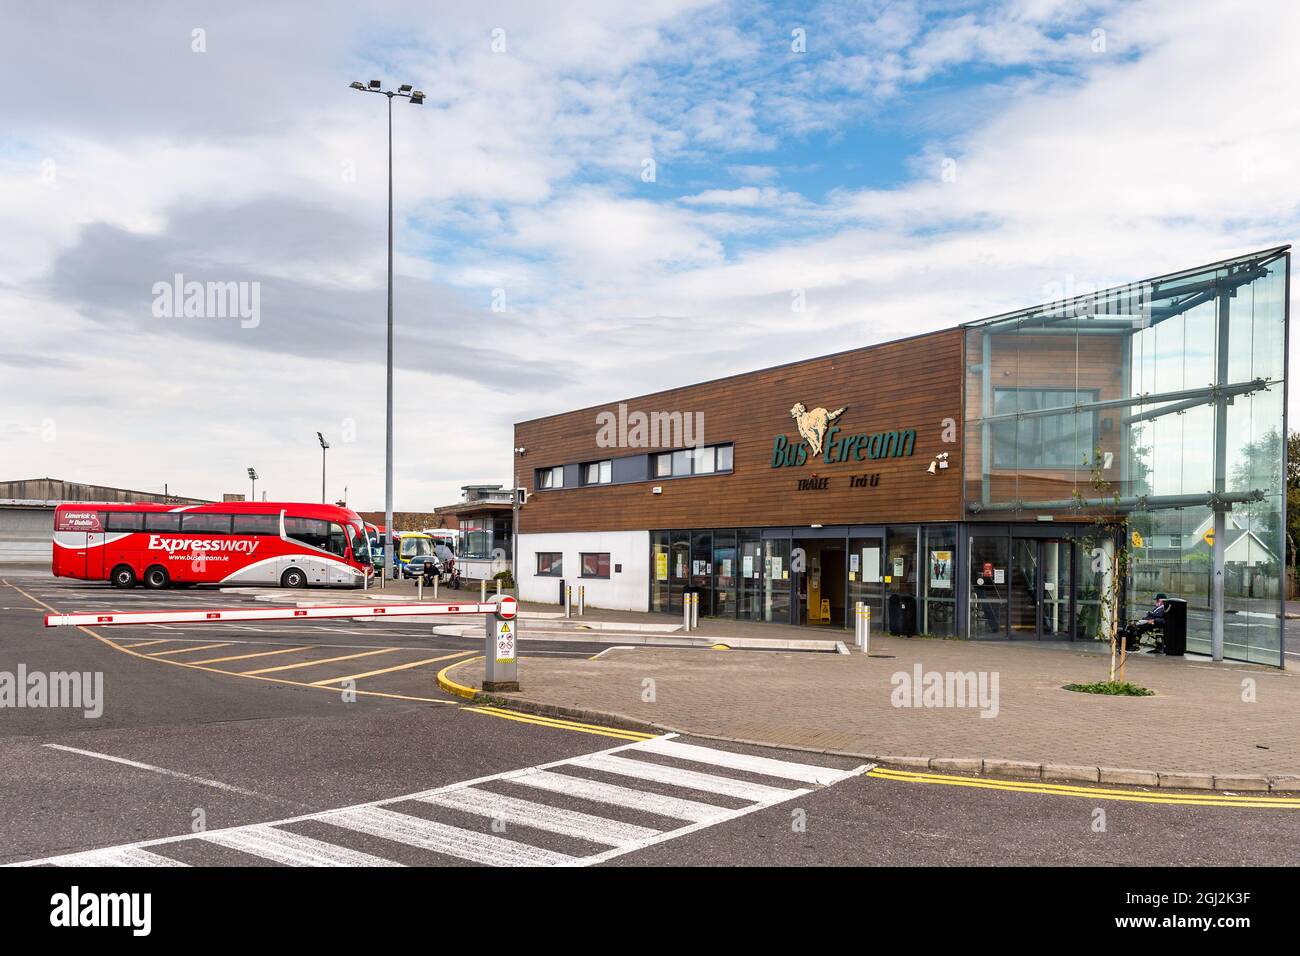 Tralee Bus Station, Tralee, Co. Kerry, Irland. Stockfoto